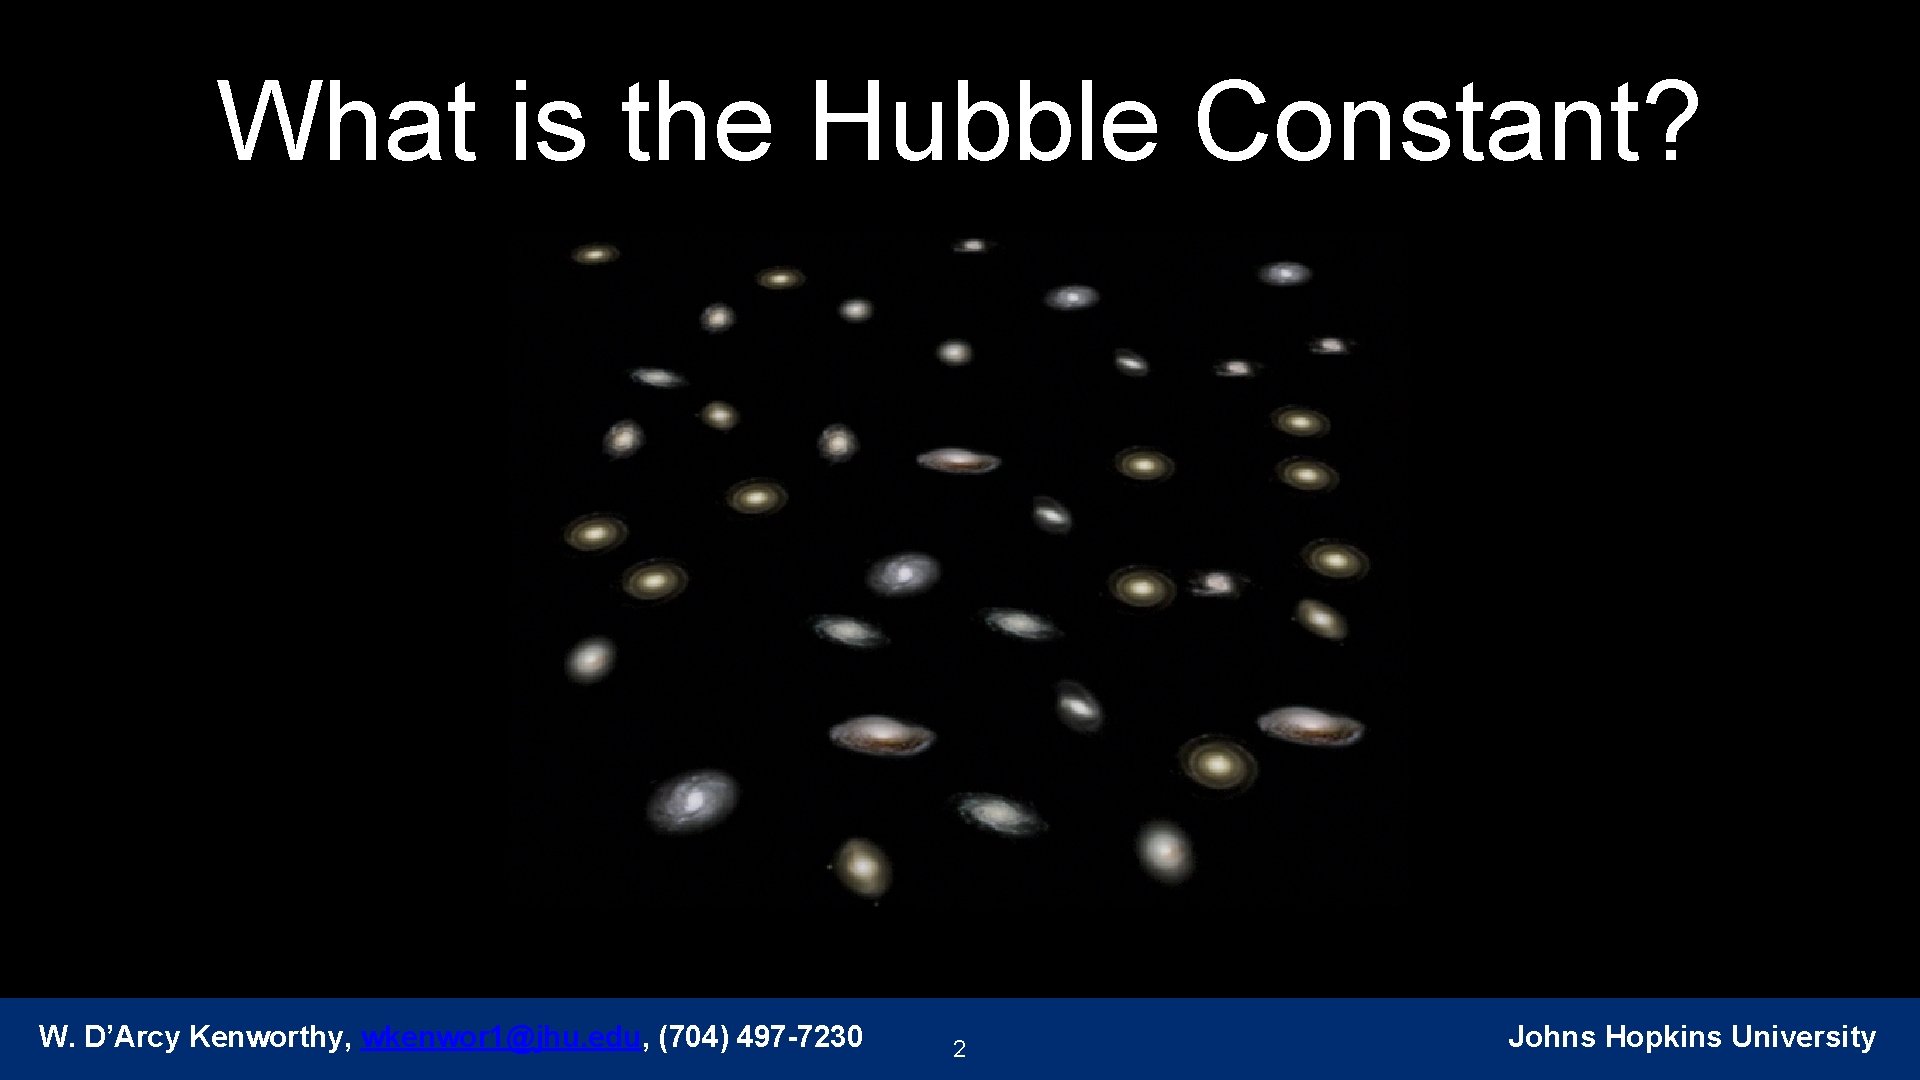 What is the Hubble Constant? W. D’Arcy Kenworthy, wkenwor 1@jhu. edu, (704) 497 -7230